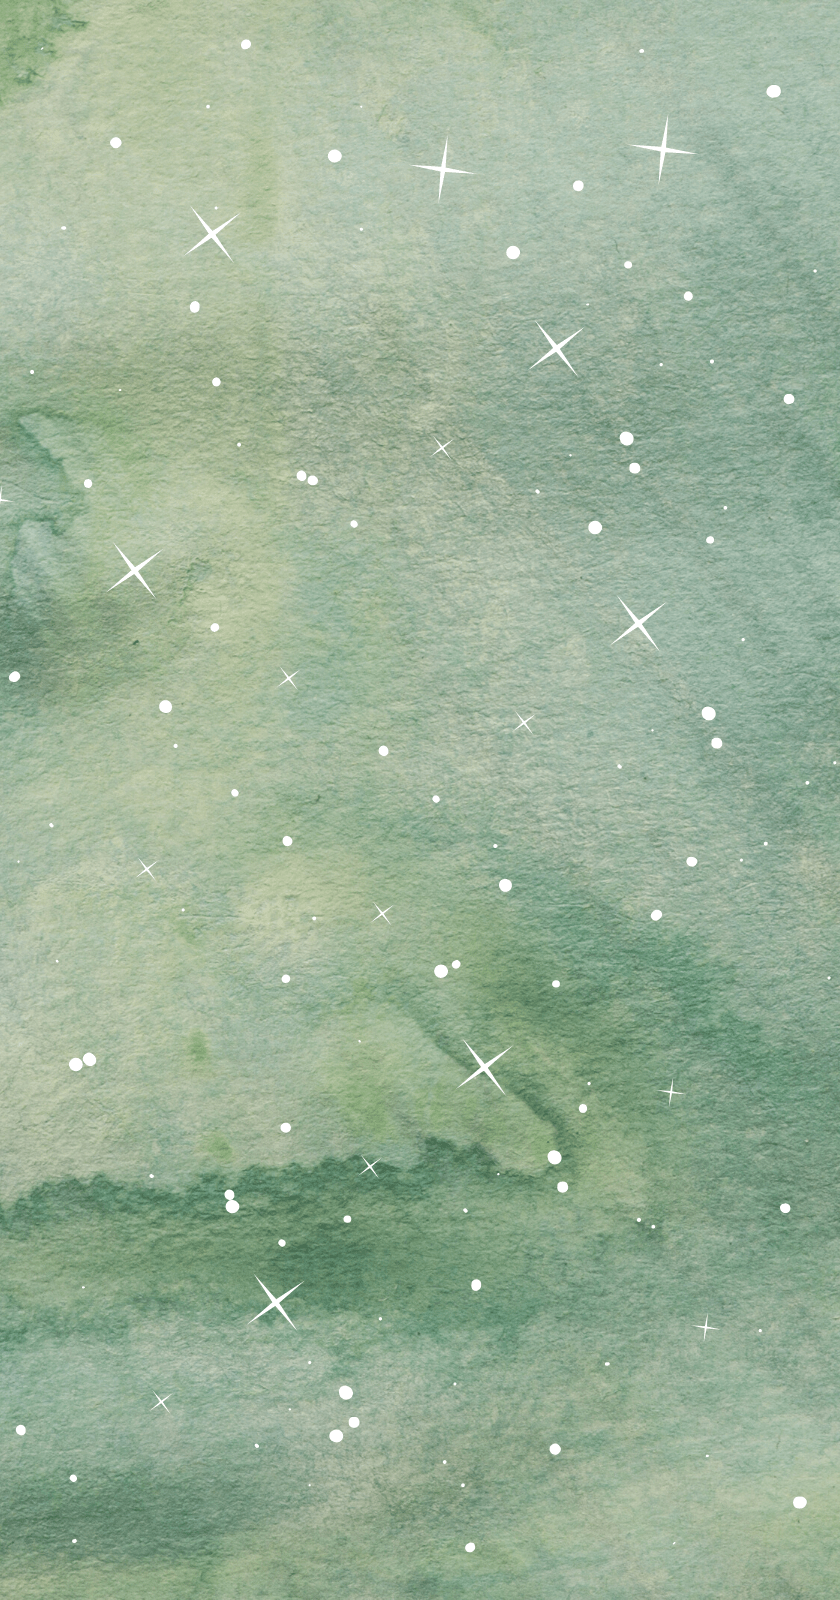 A watercolor painting of a green and blue gradient sky with white stars. - Green